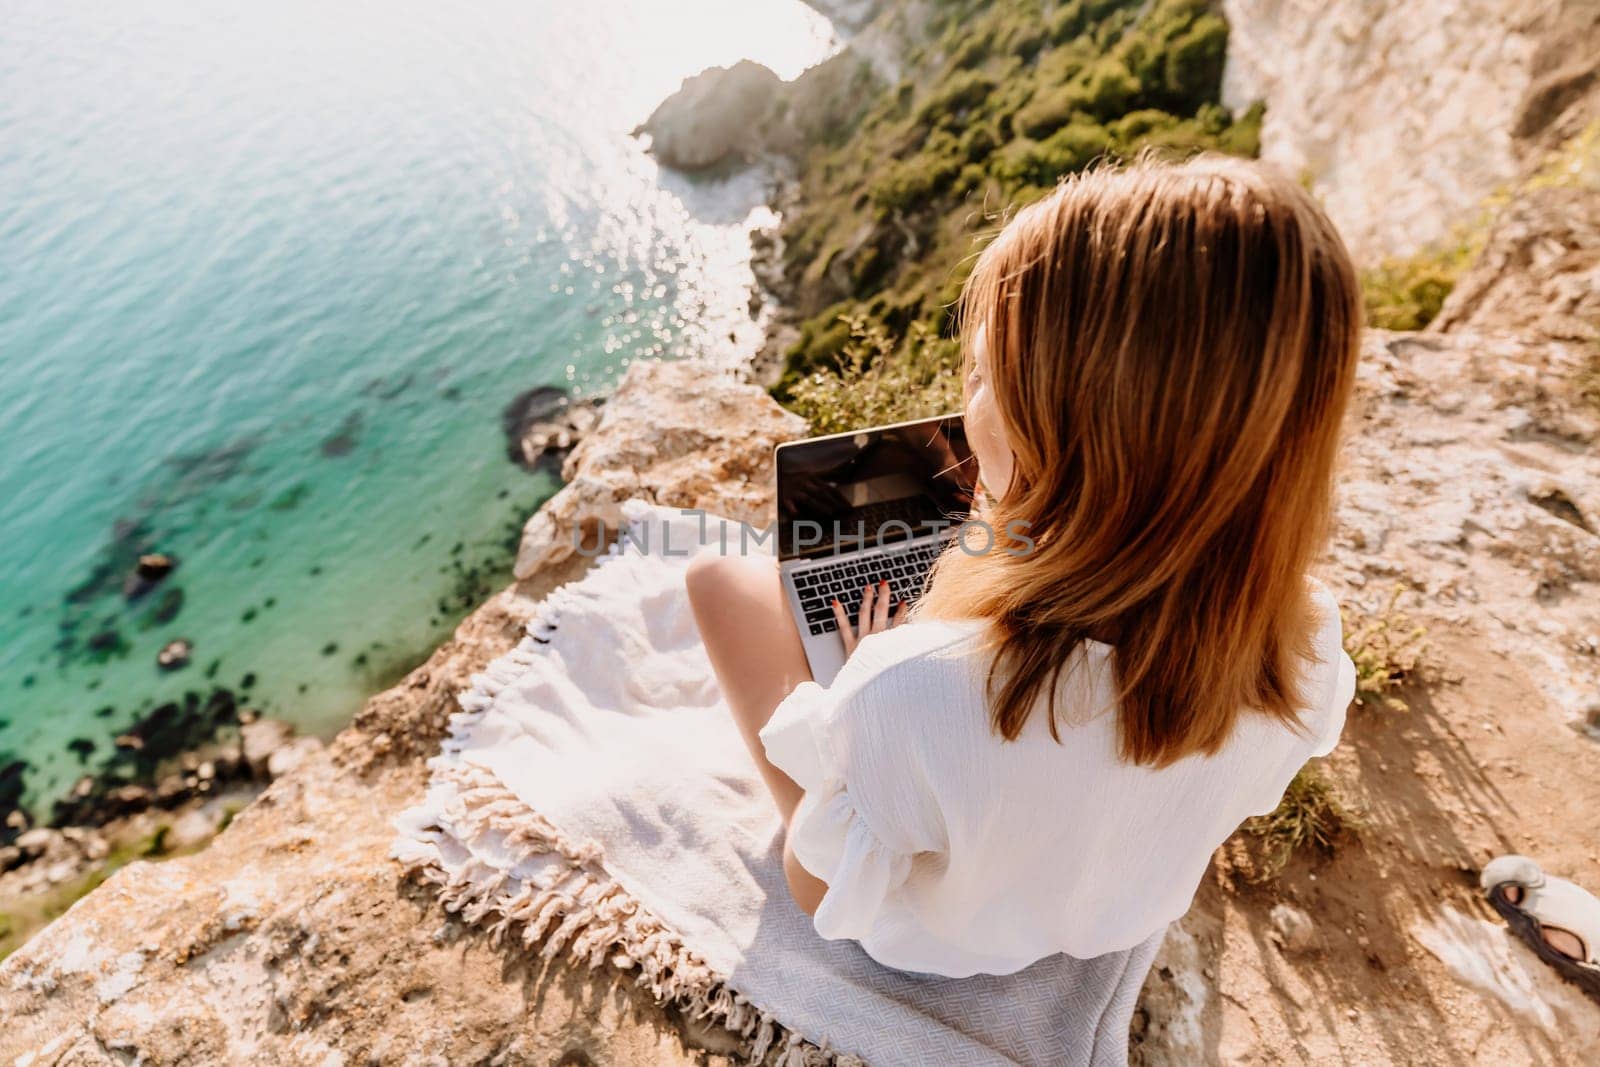 A woman is sitting on a rock overlooking the ocean with a laptop in front of her. She is enjoying the view and the peacefulness of the location